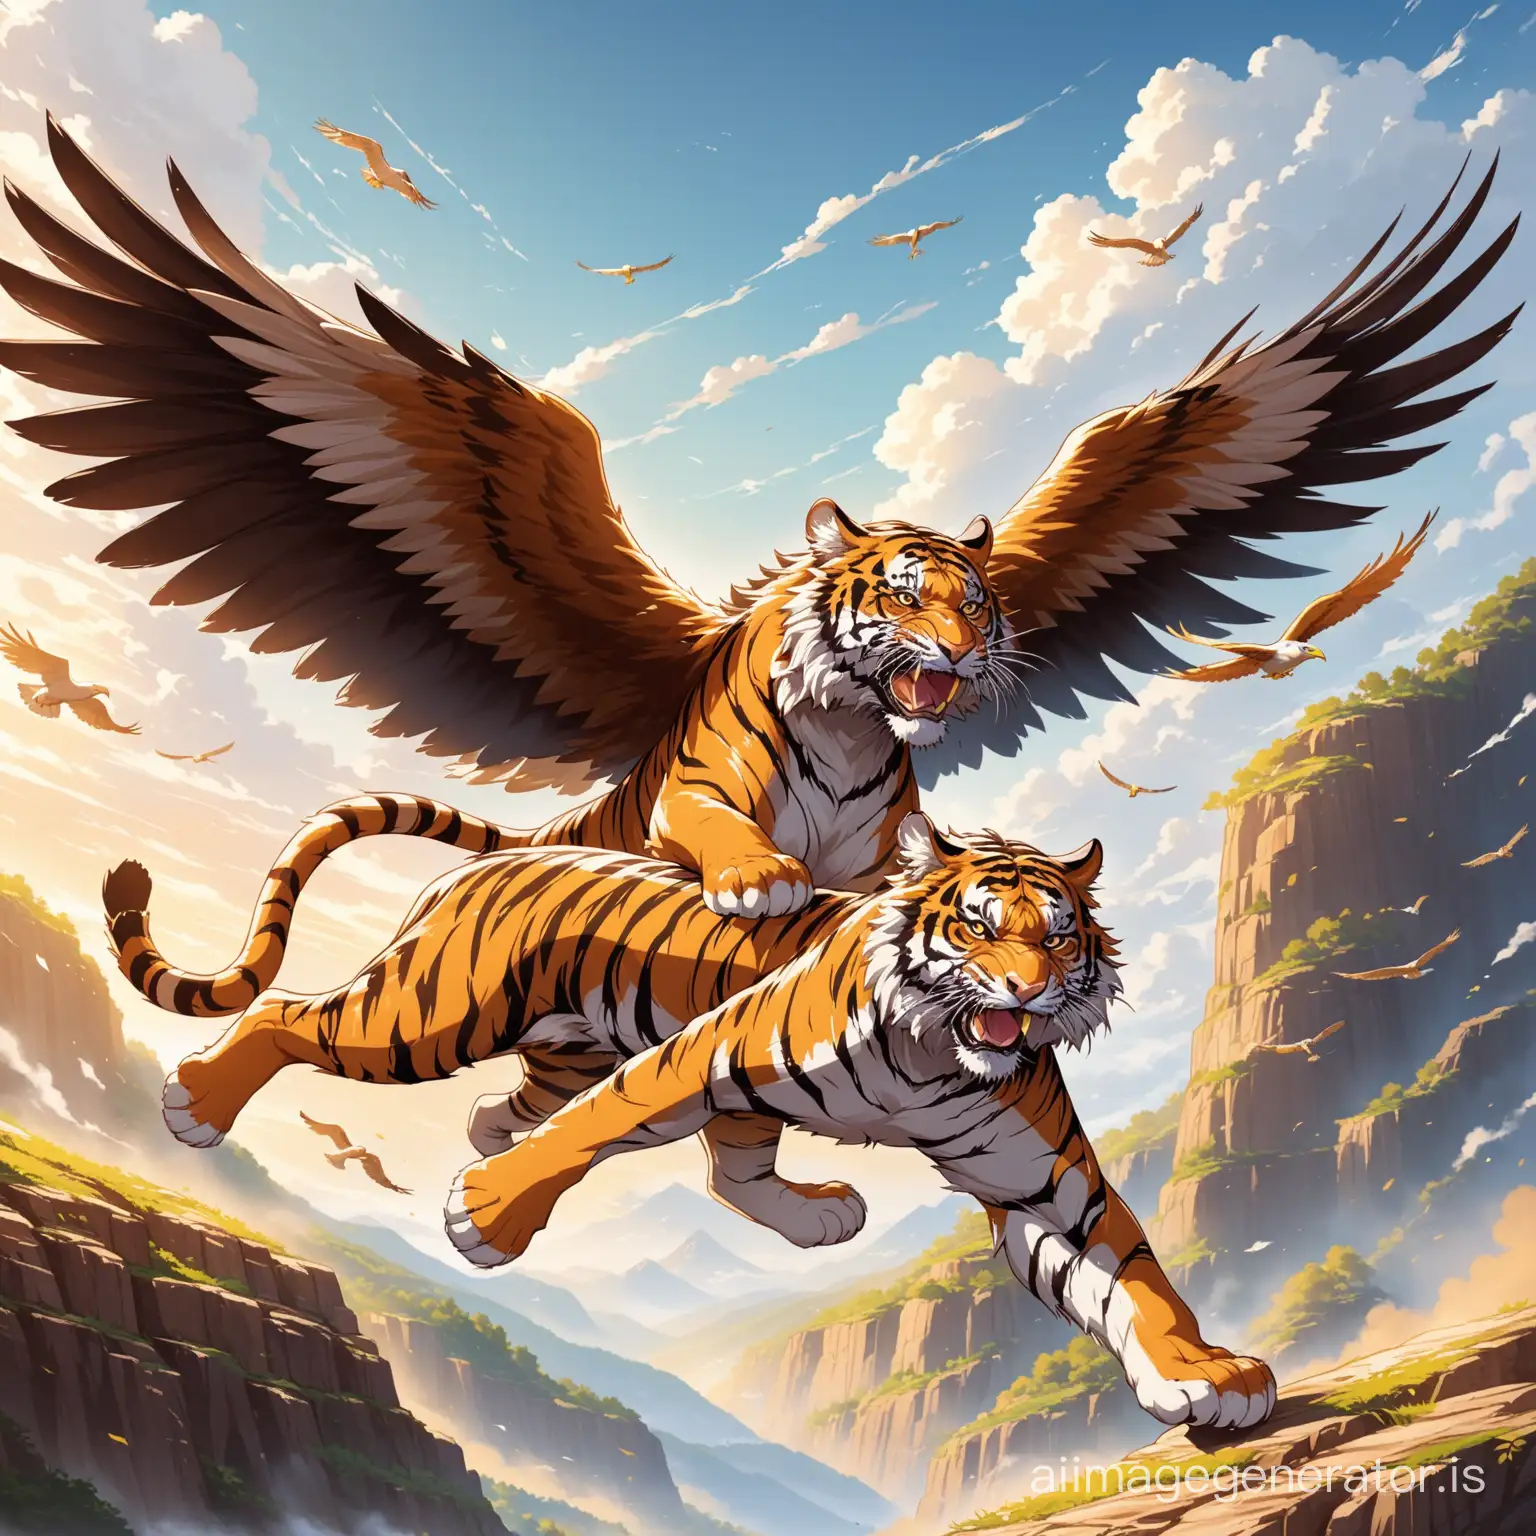 Victorious-Tiger-with-Eagle-Wings-in-Epic-Battle